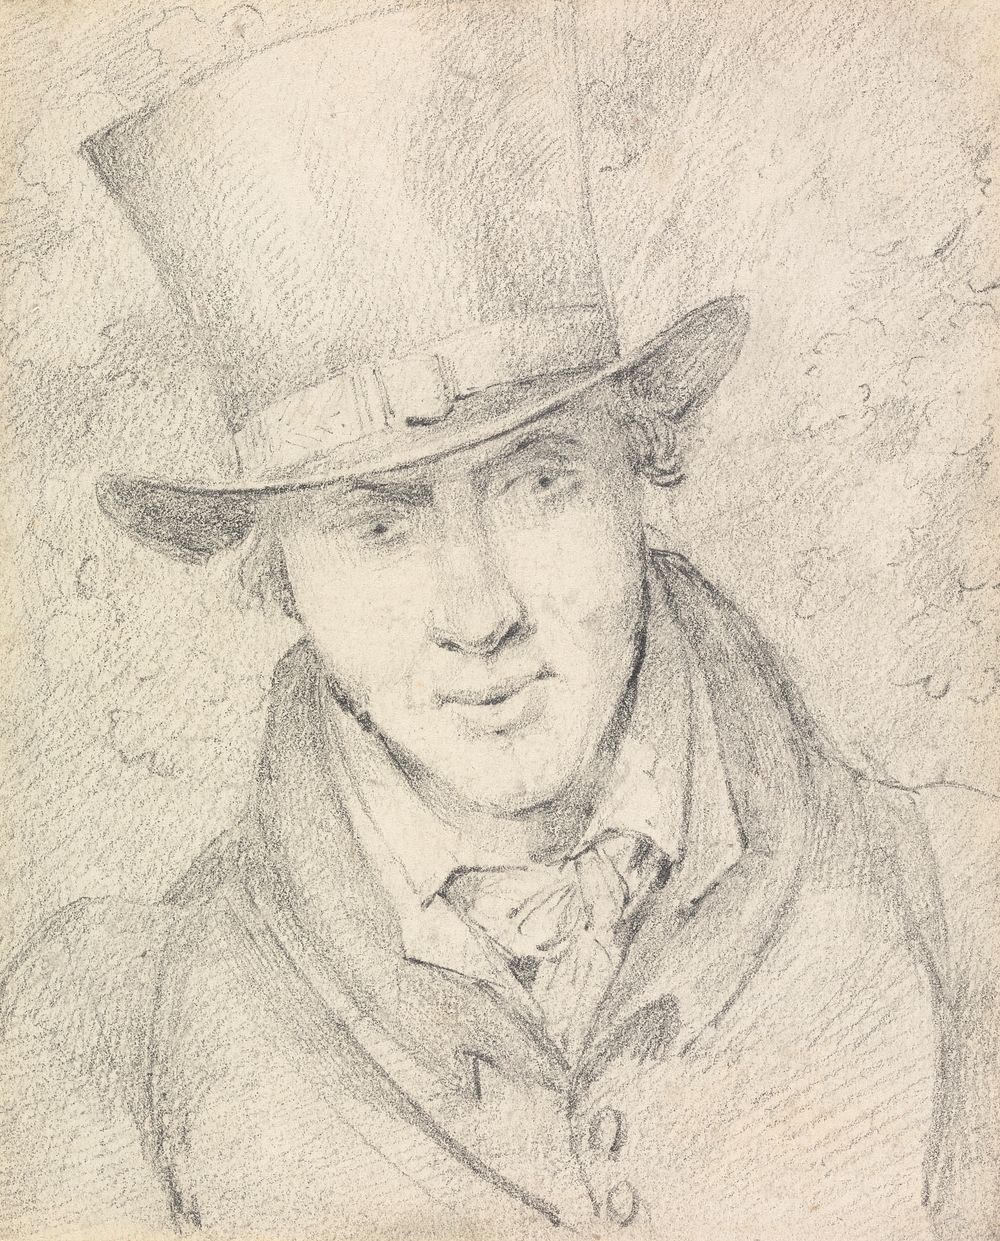 Self-Portrait, Full Face Looking Downwards to Right, Wearing a Top Hat